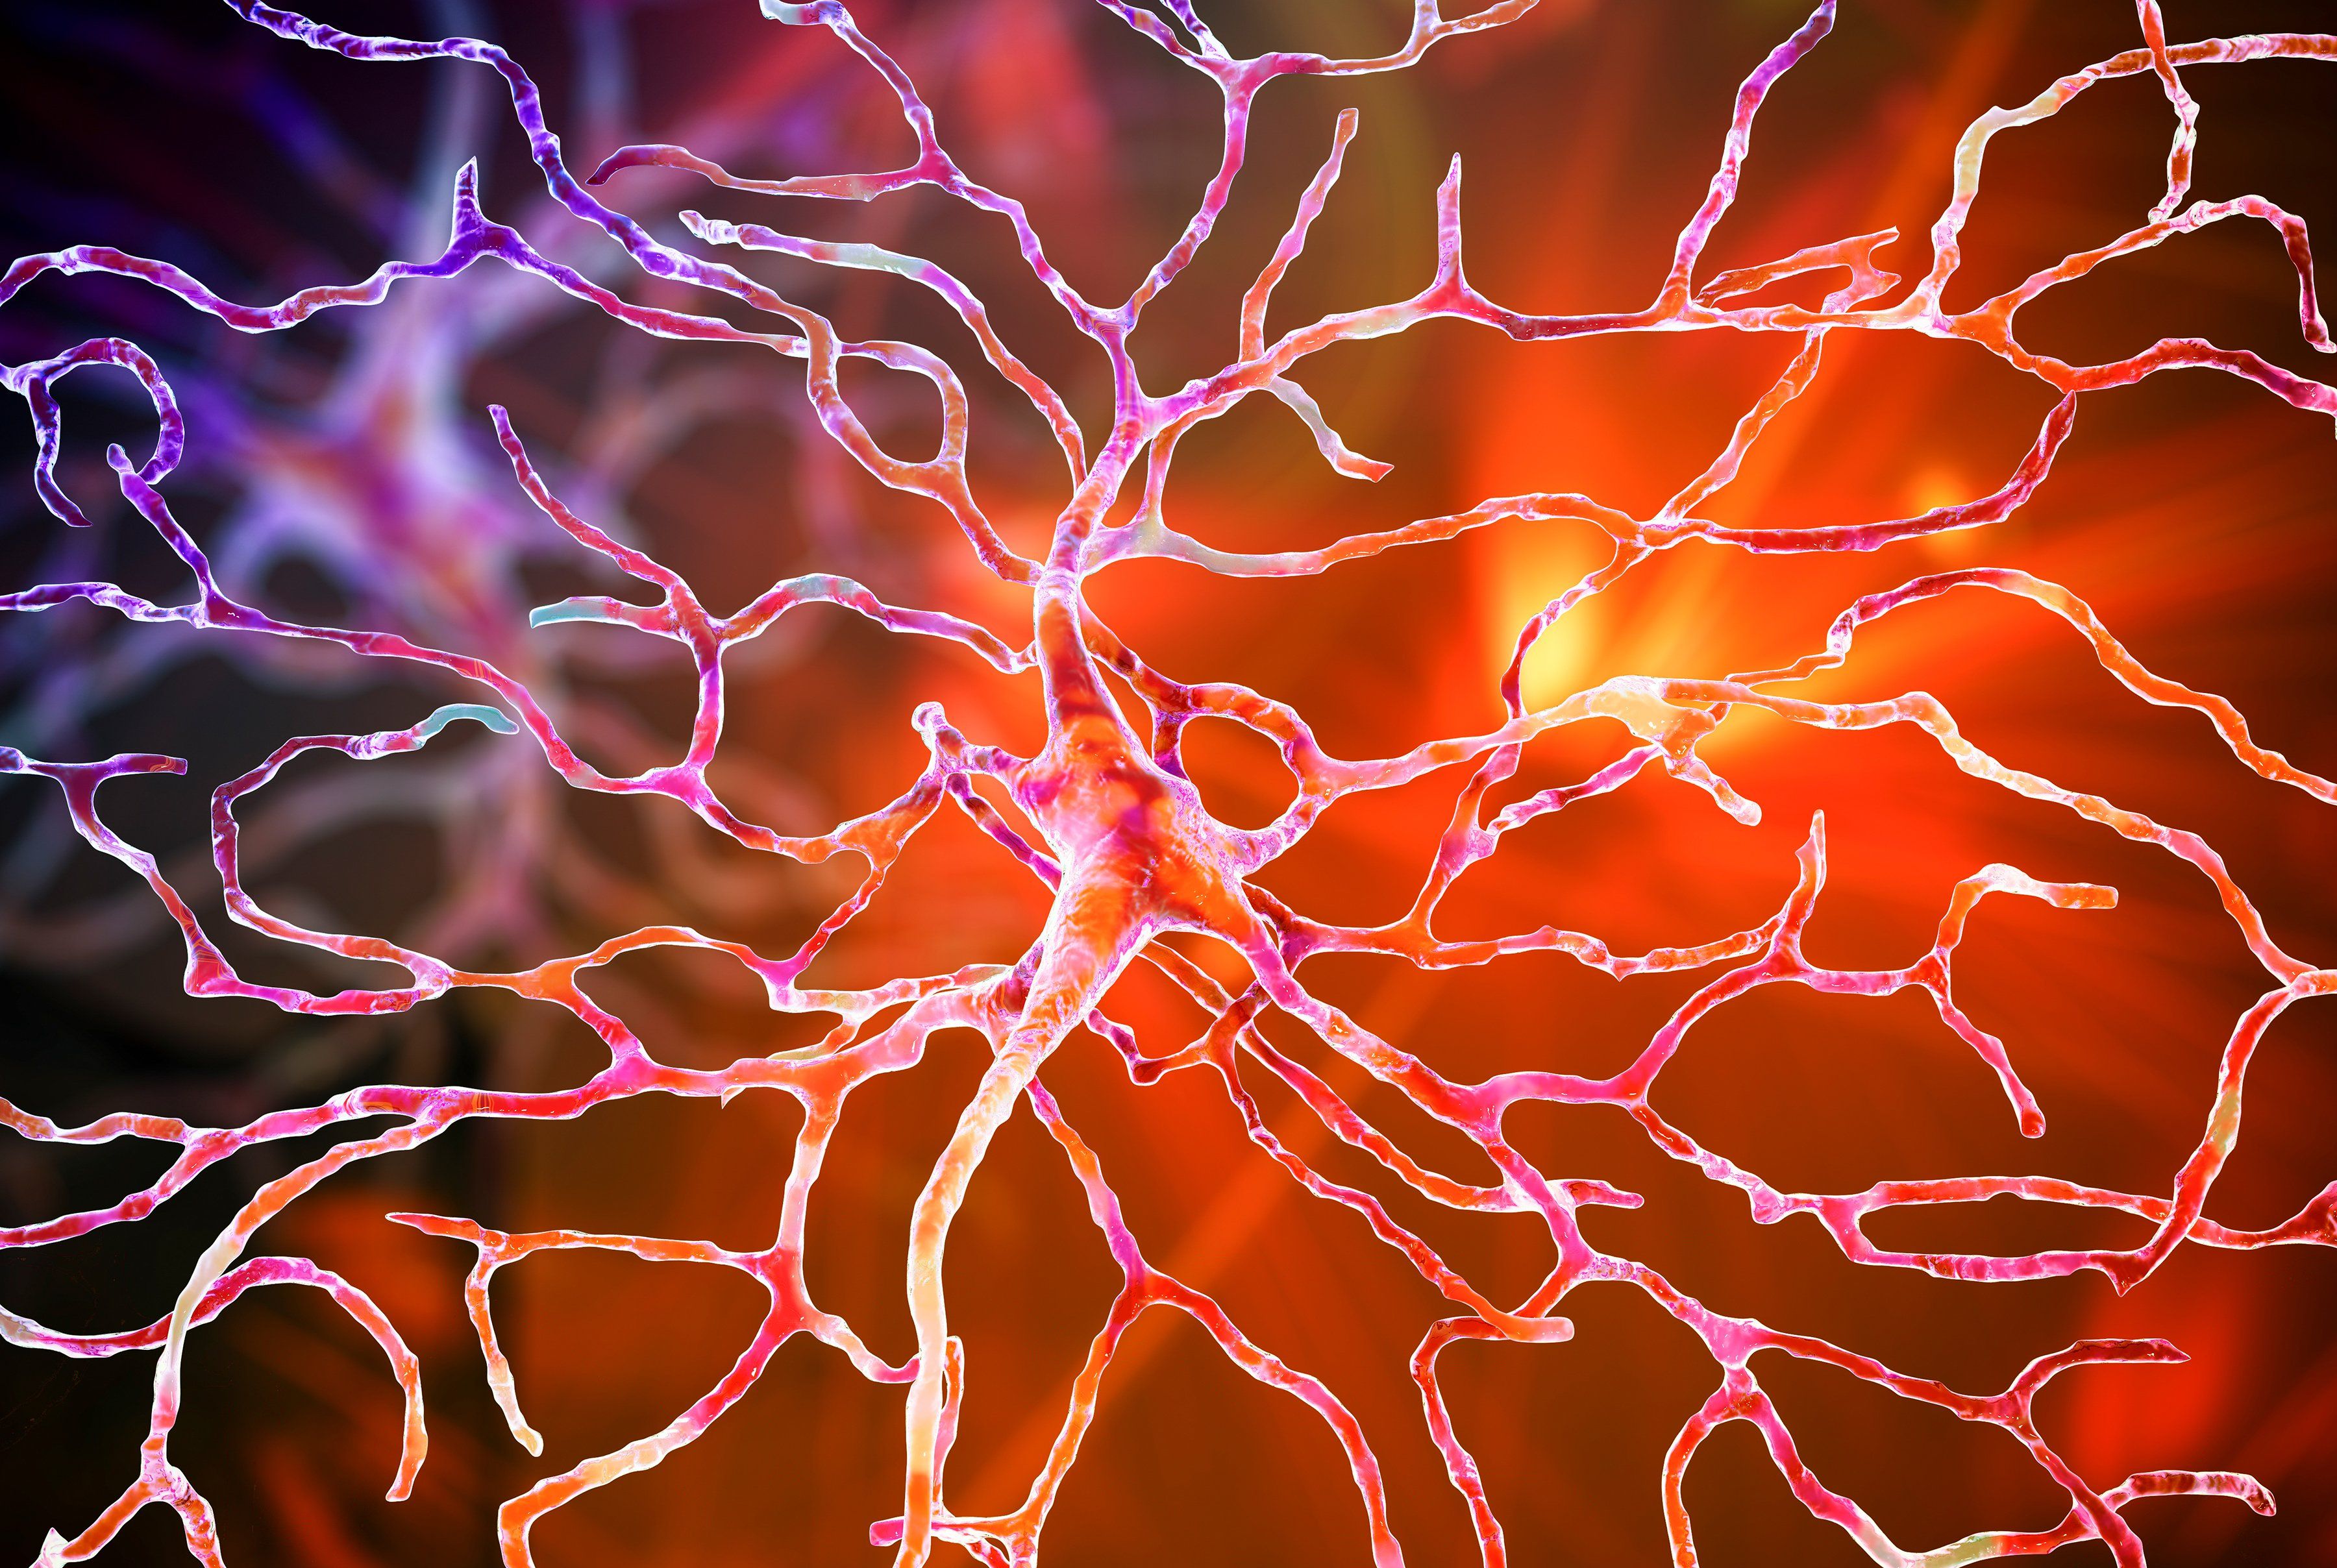 An illustration of a retinal neuron, showing a web of connections.